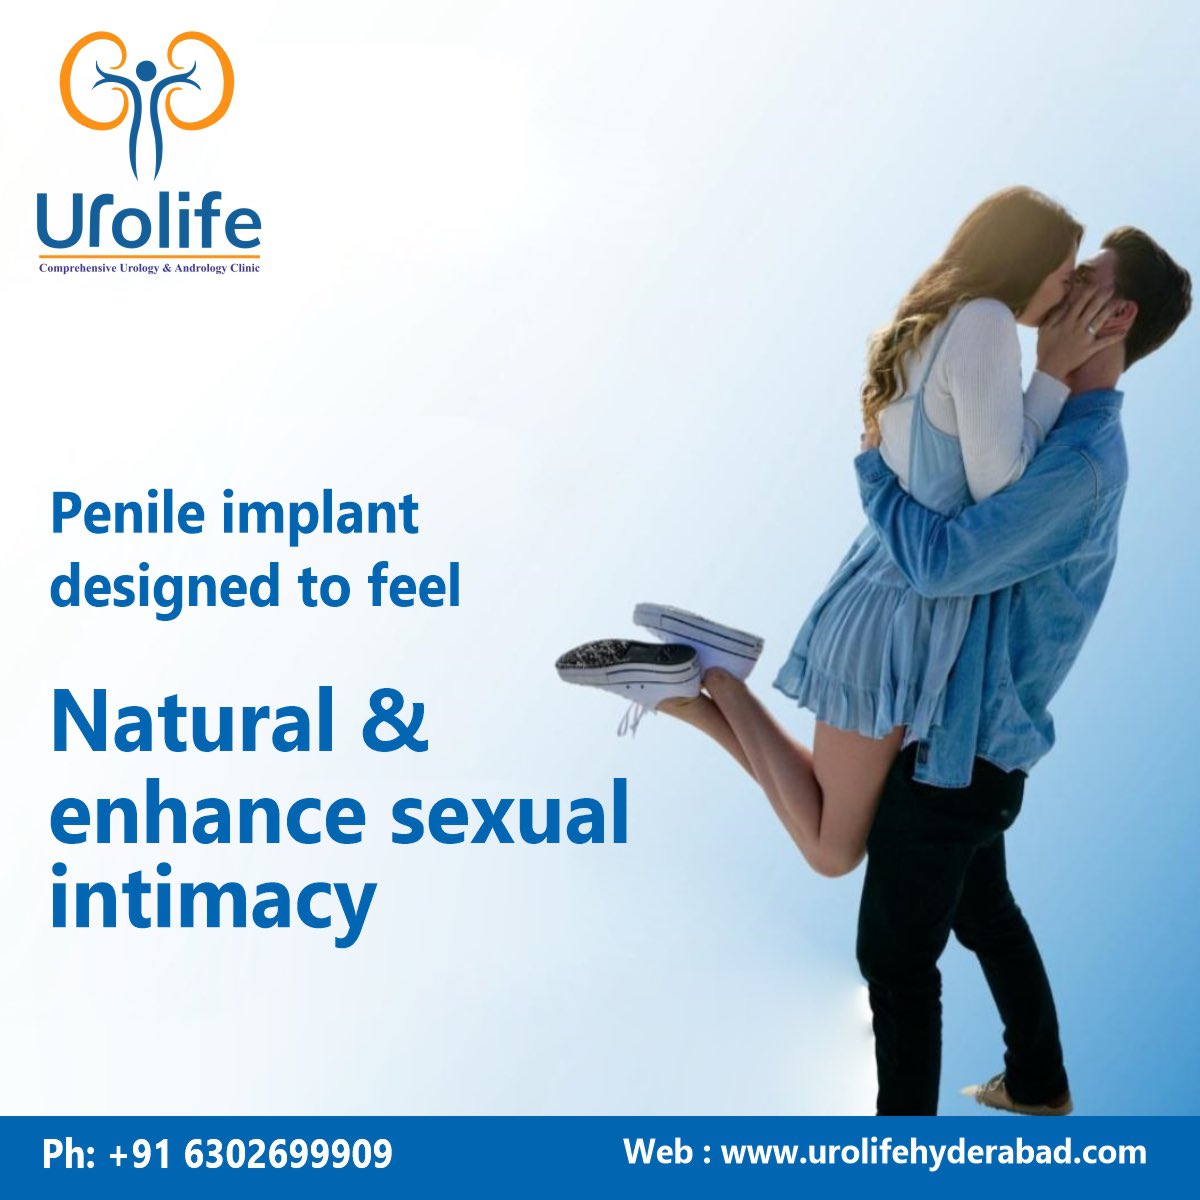 Penile implant designed to feel

Natural & enhance sexual intimacy 

Best penile treatment in Hyderabad 

#penileimplant #penileimplants #penileimplantcost #penileimplantsurgery #maleinfertility #male #infertility #infertilityjourney #infertilitysupport #andrology #andrologyteam